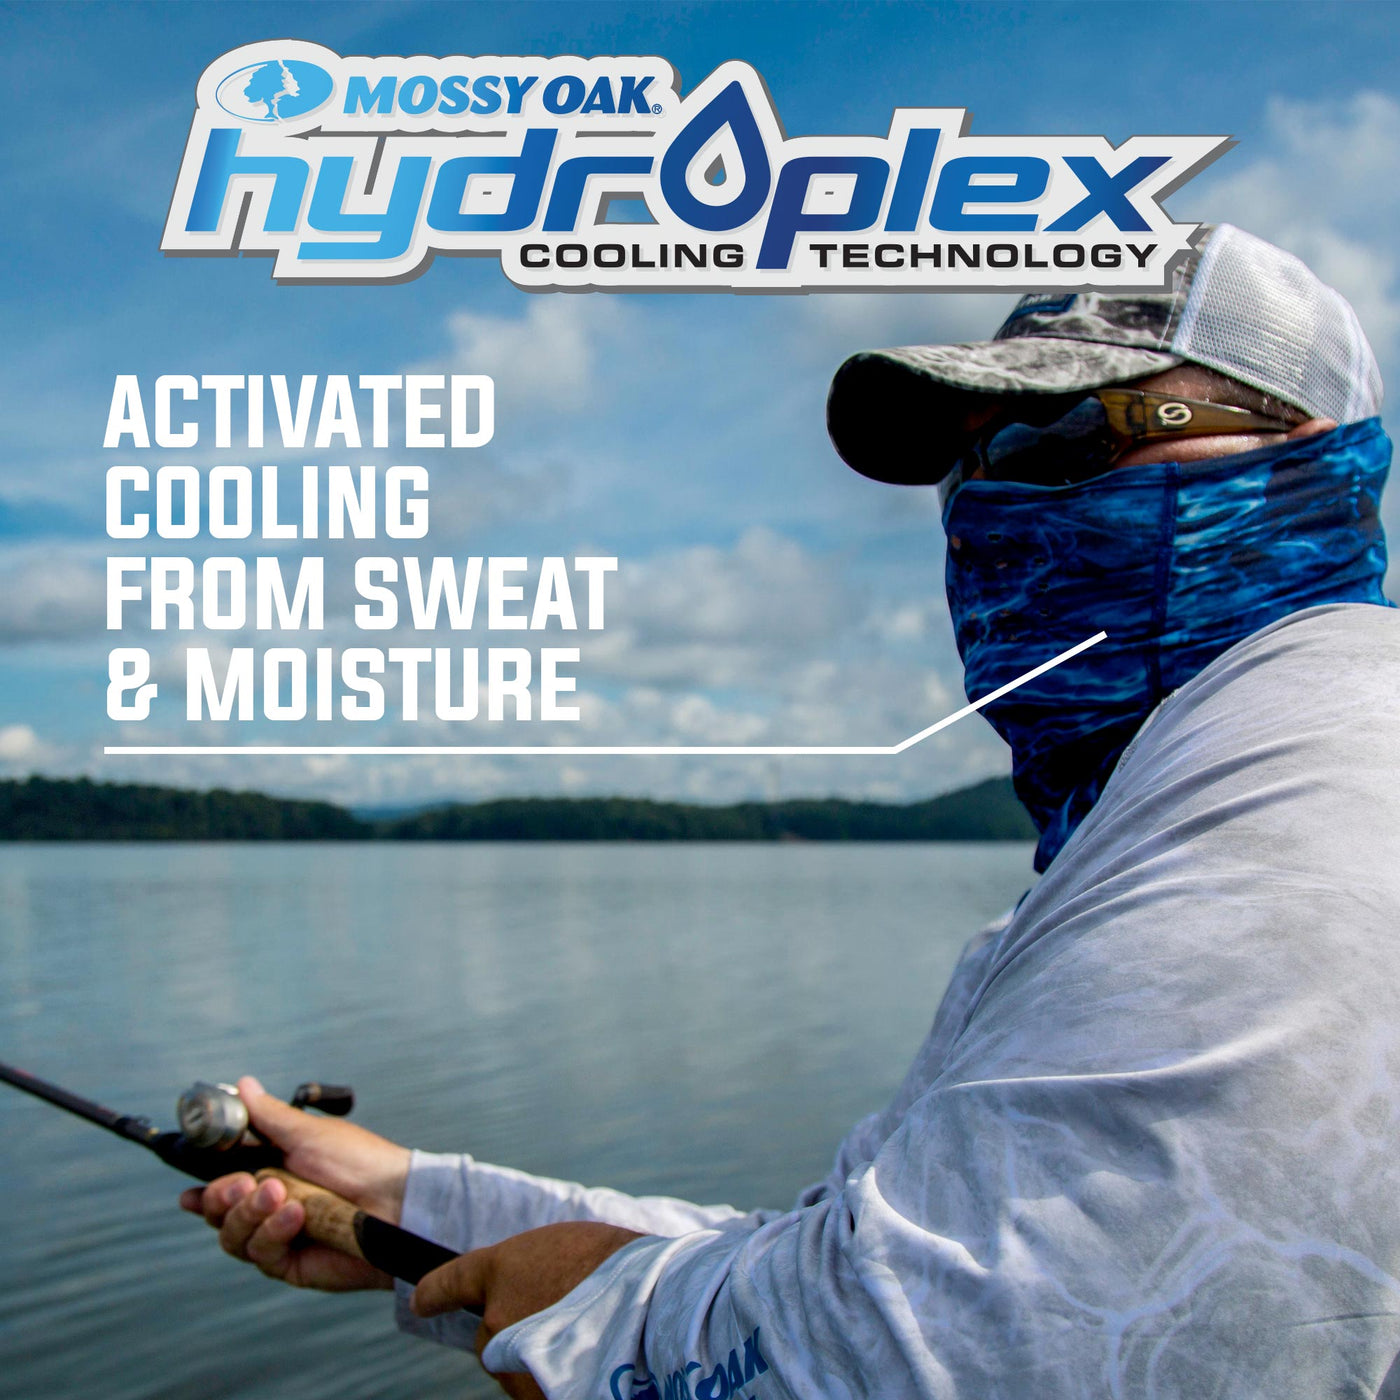 Mossy Oak Fishing Neck Gaiter Hydroplex Cooling Technology Activated Cooling from Sweat and Moisture